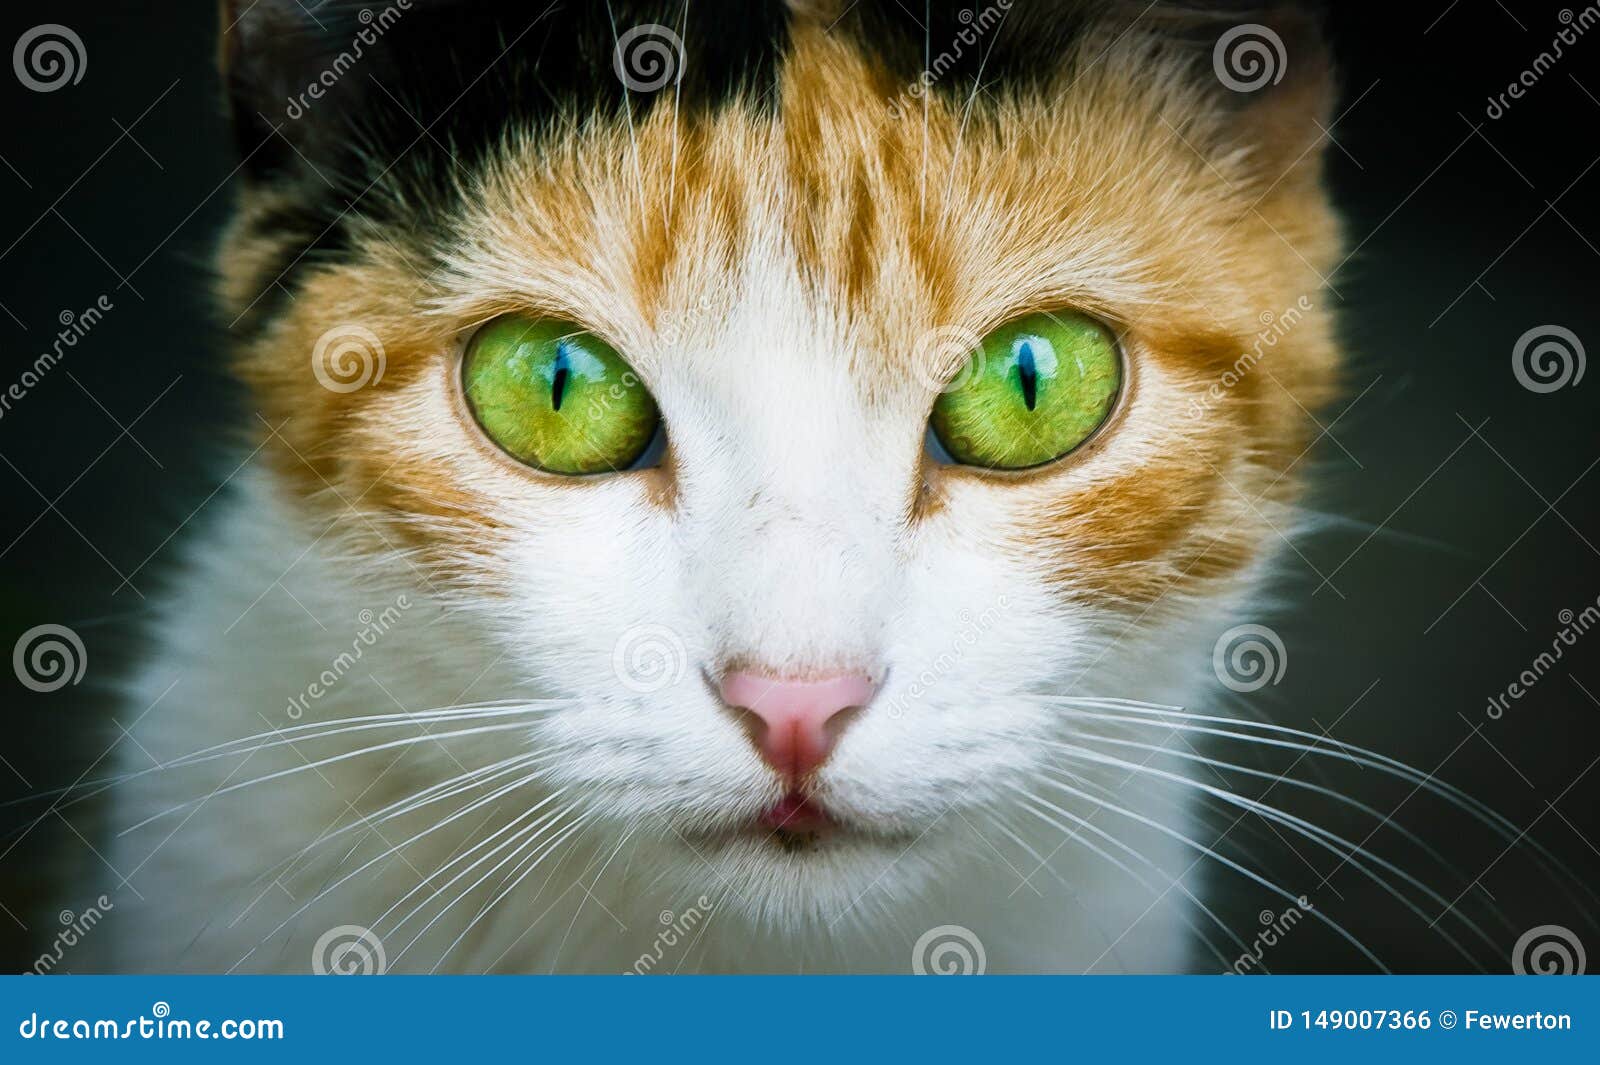 cat close photo. cat portrait close-up photo emphasizing the colored green and yellow eyes staring at the camera dark background